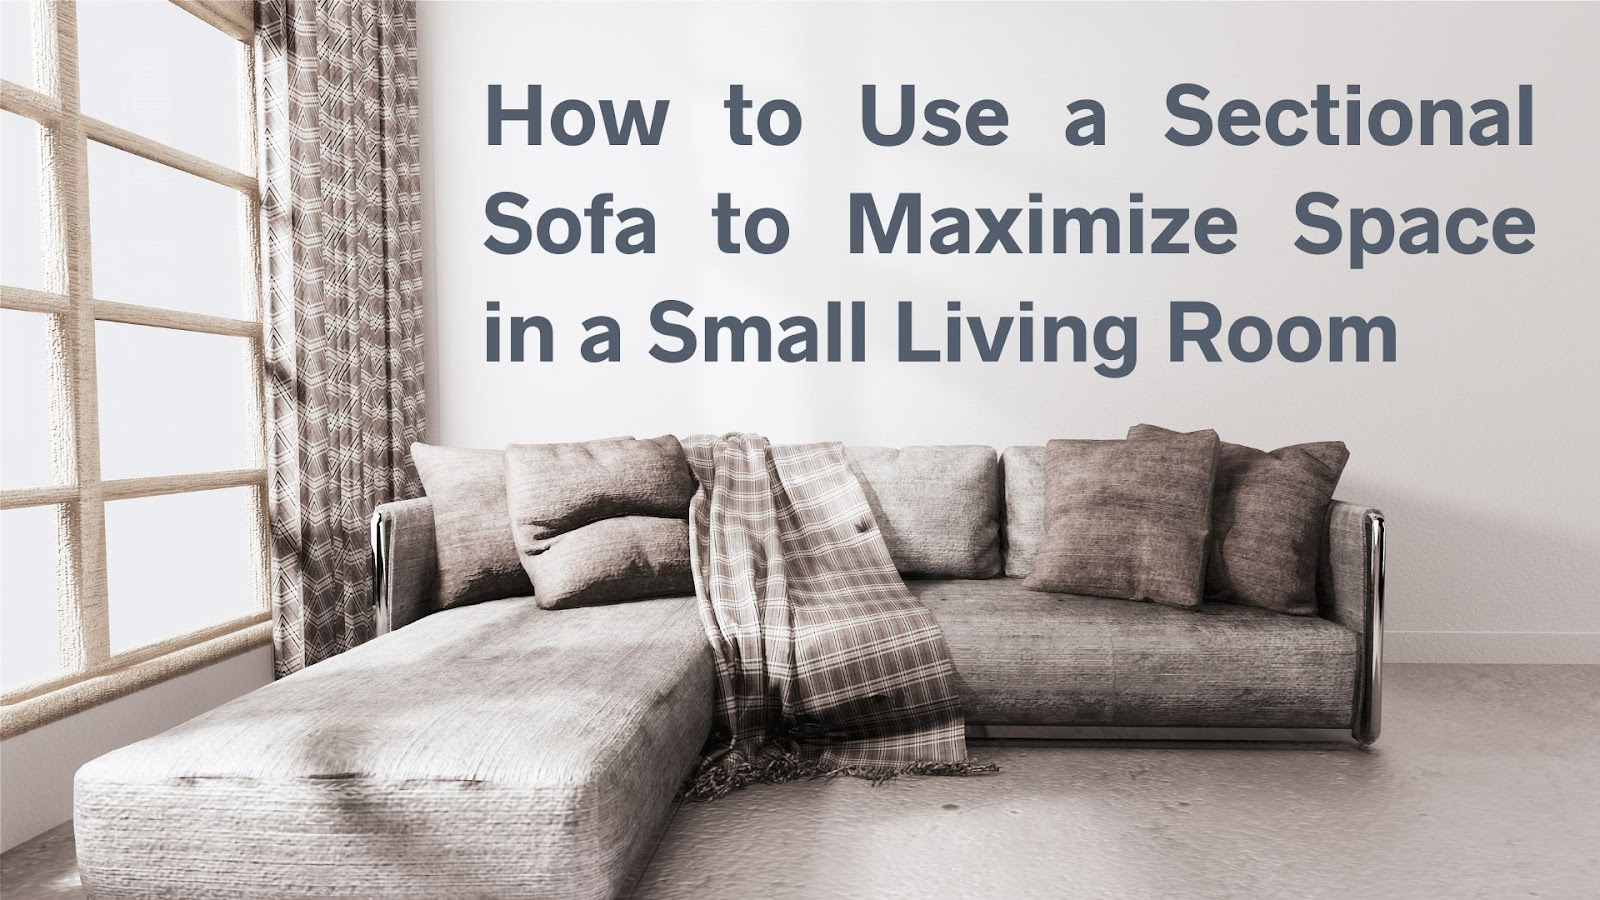 How to Use a Sectional Sofa to Maximize Space in a Small Living Room